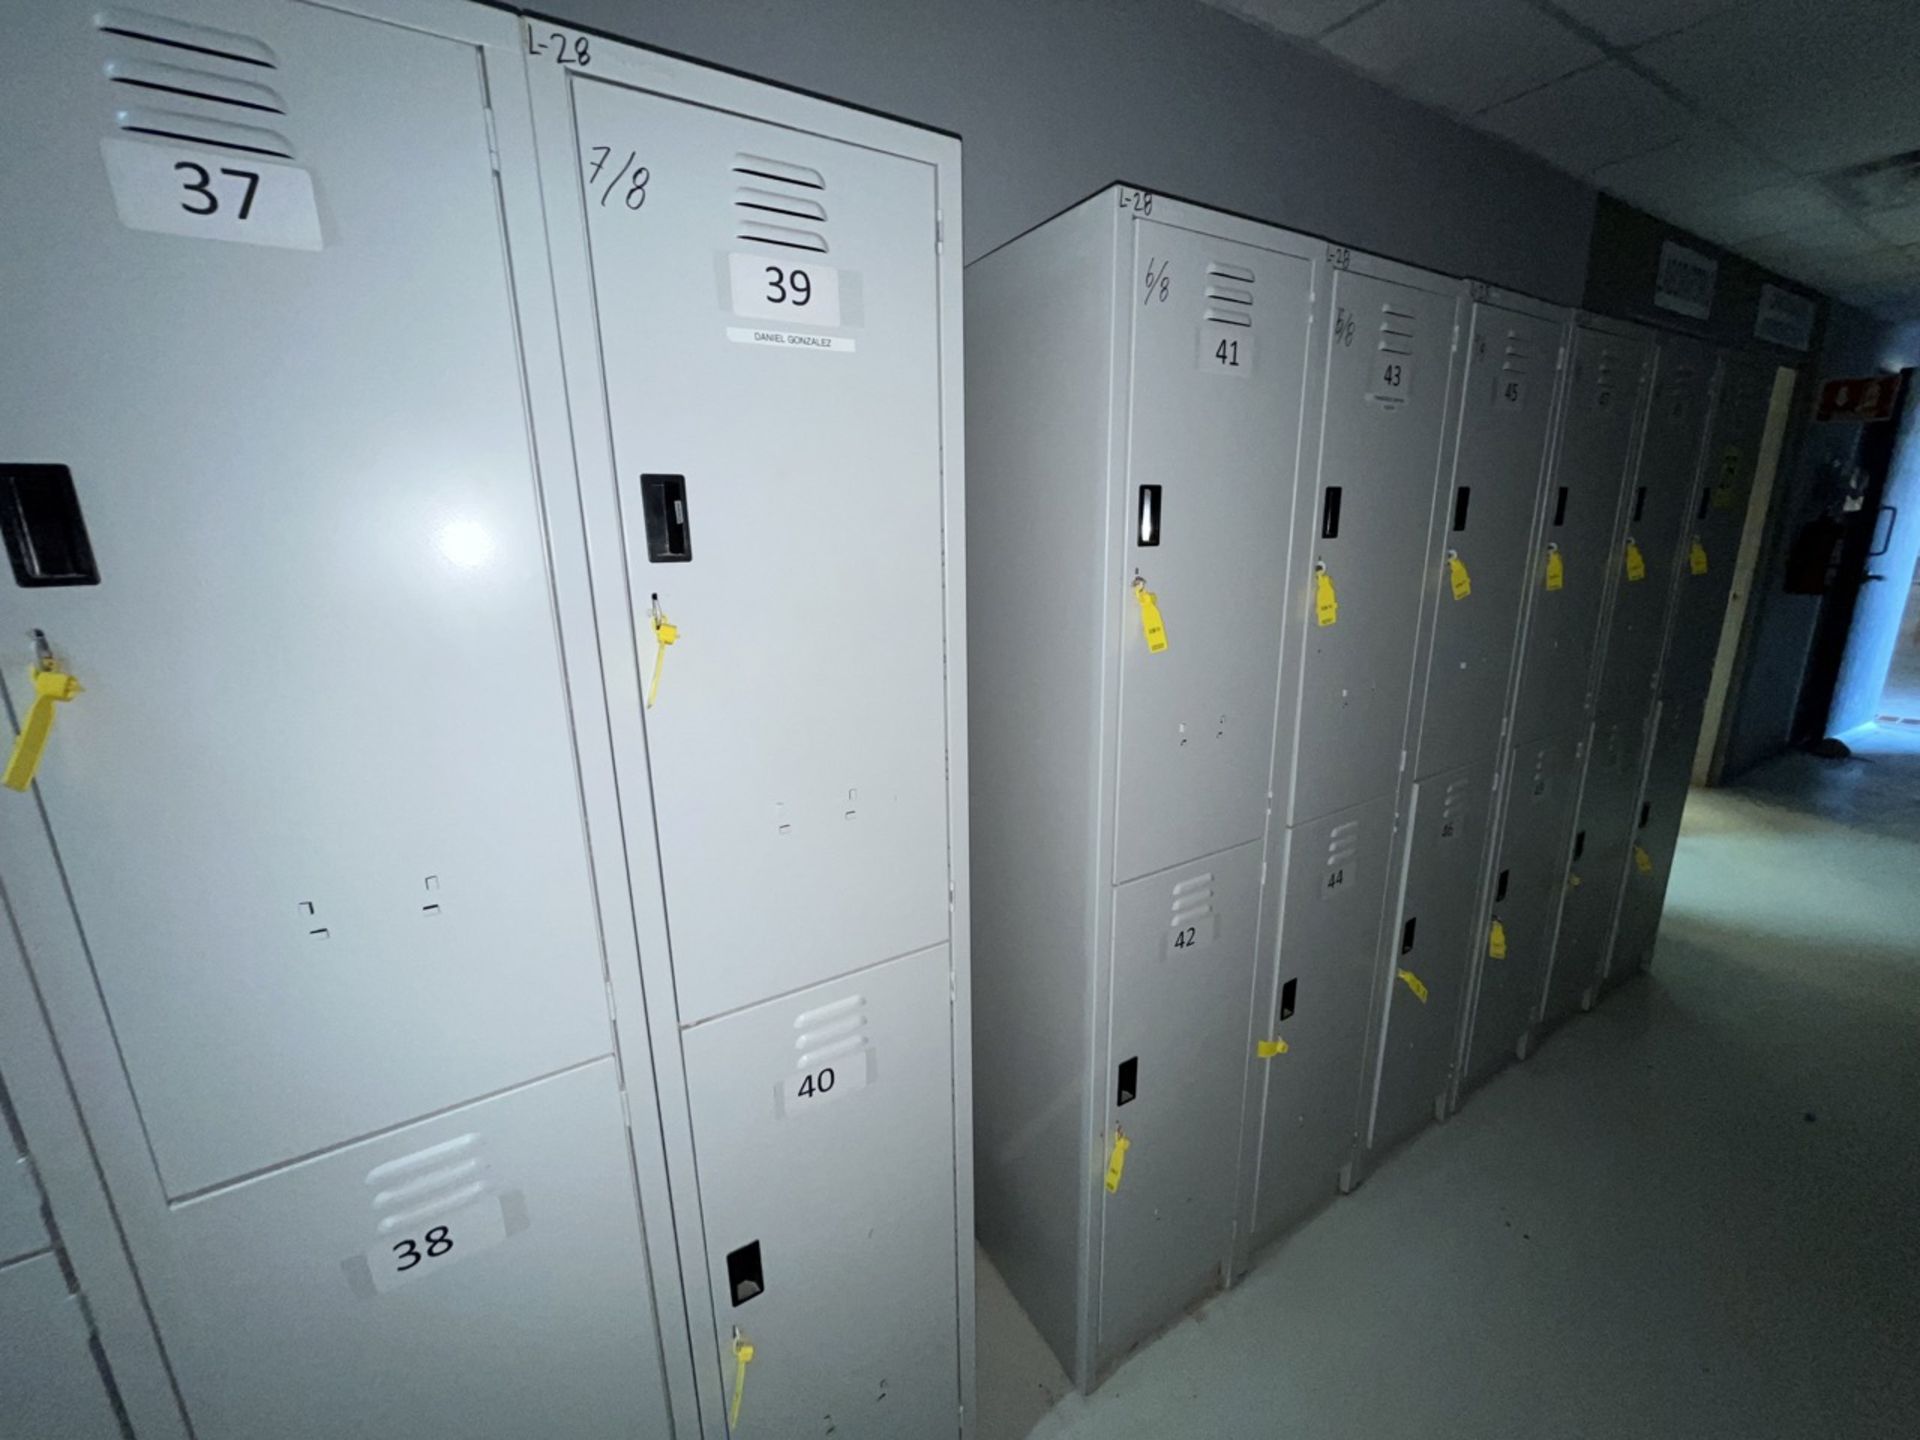 Lot of 8 storage lockers of 2 spaces each, measuring approximately 0.40 x 0.40 x 1.80 meters. / Lo - Bild 3 aus 5